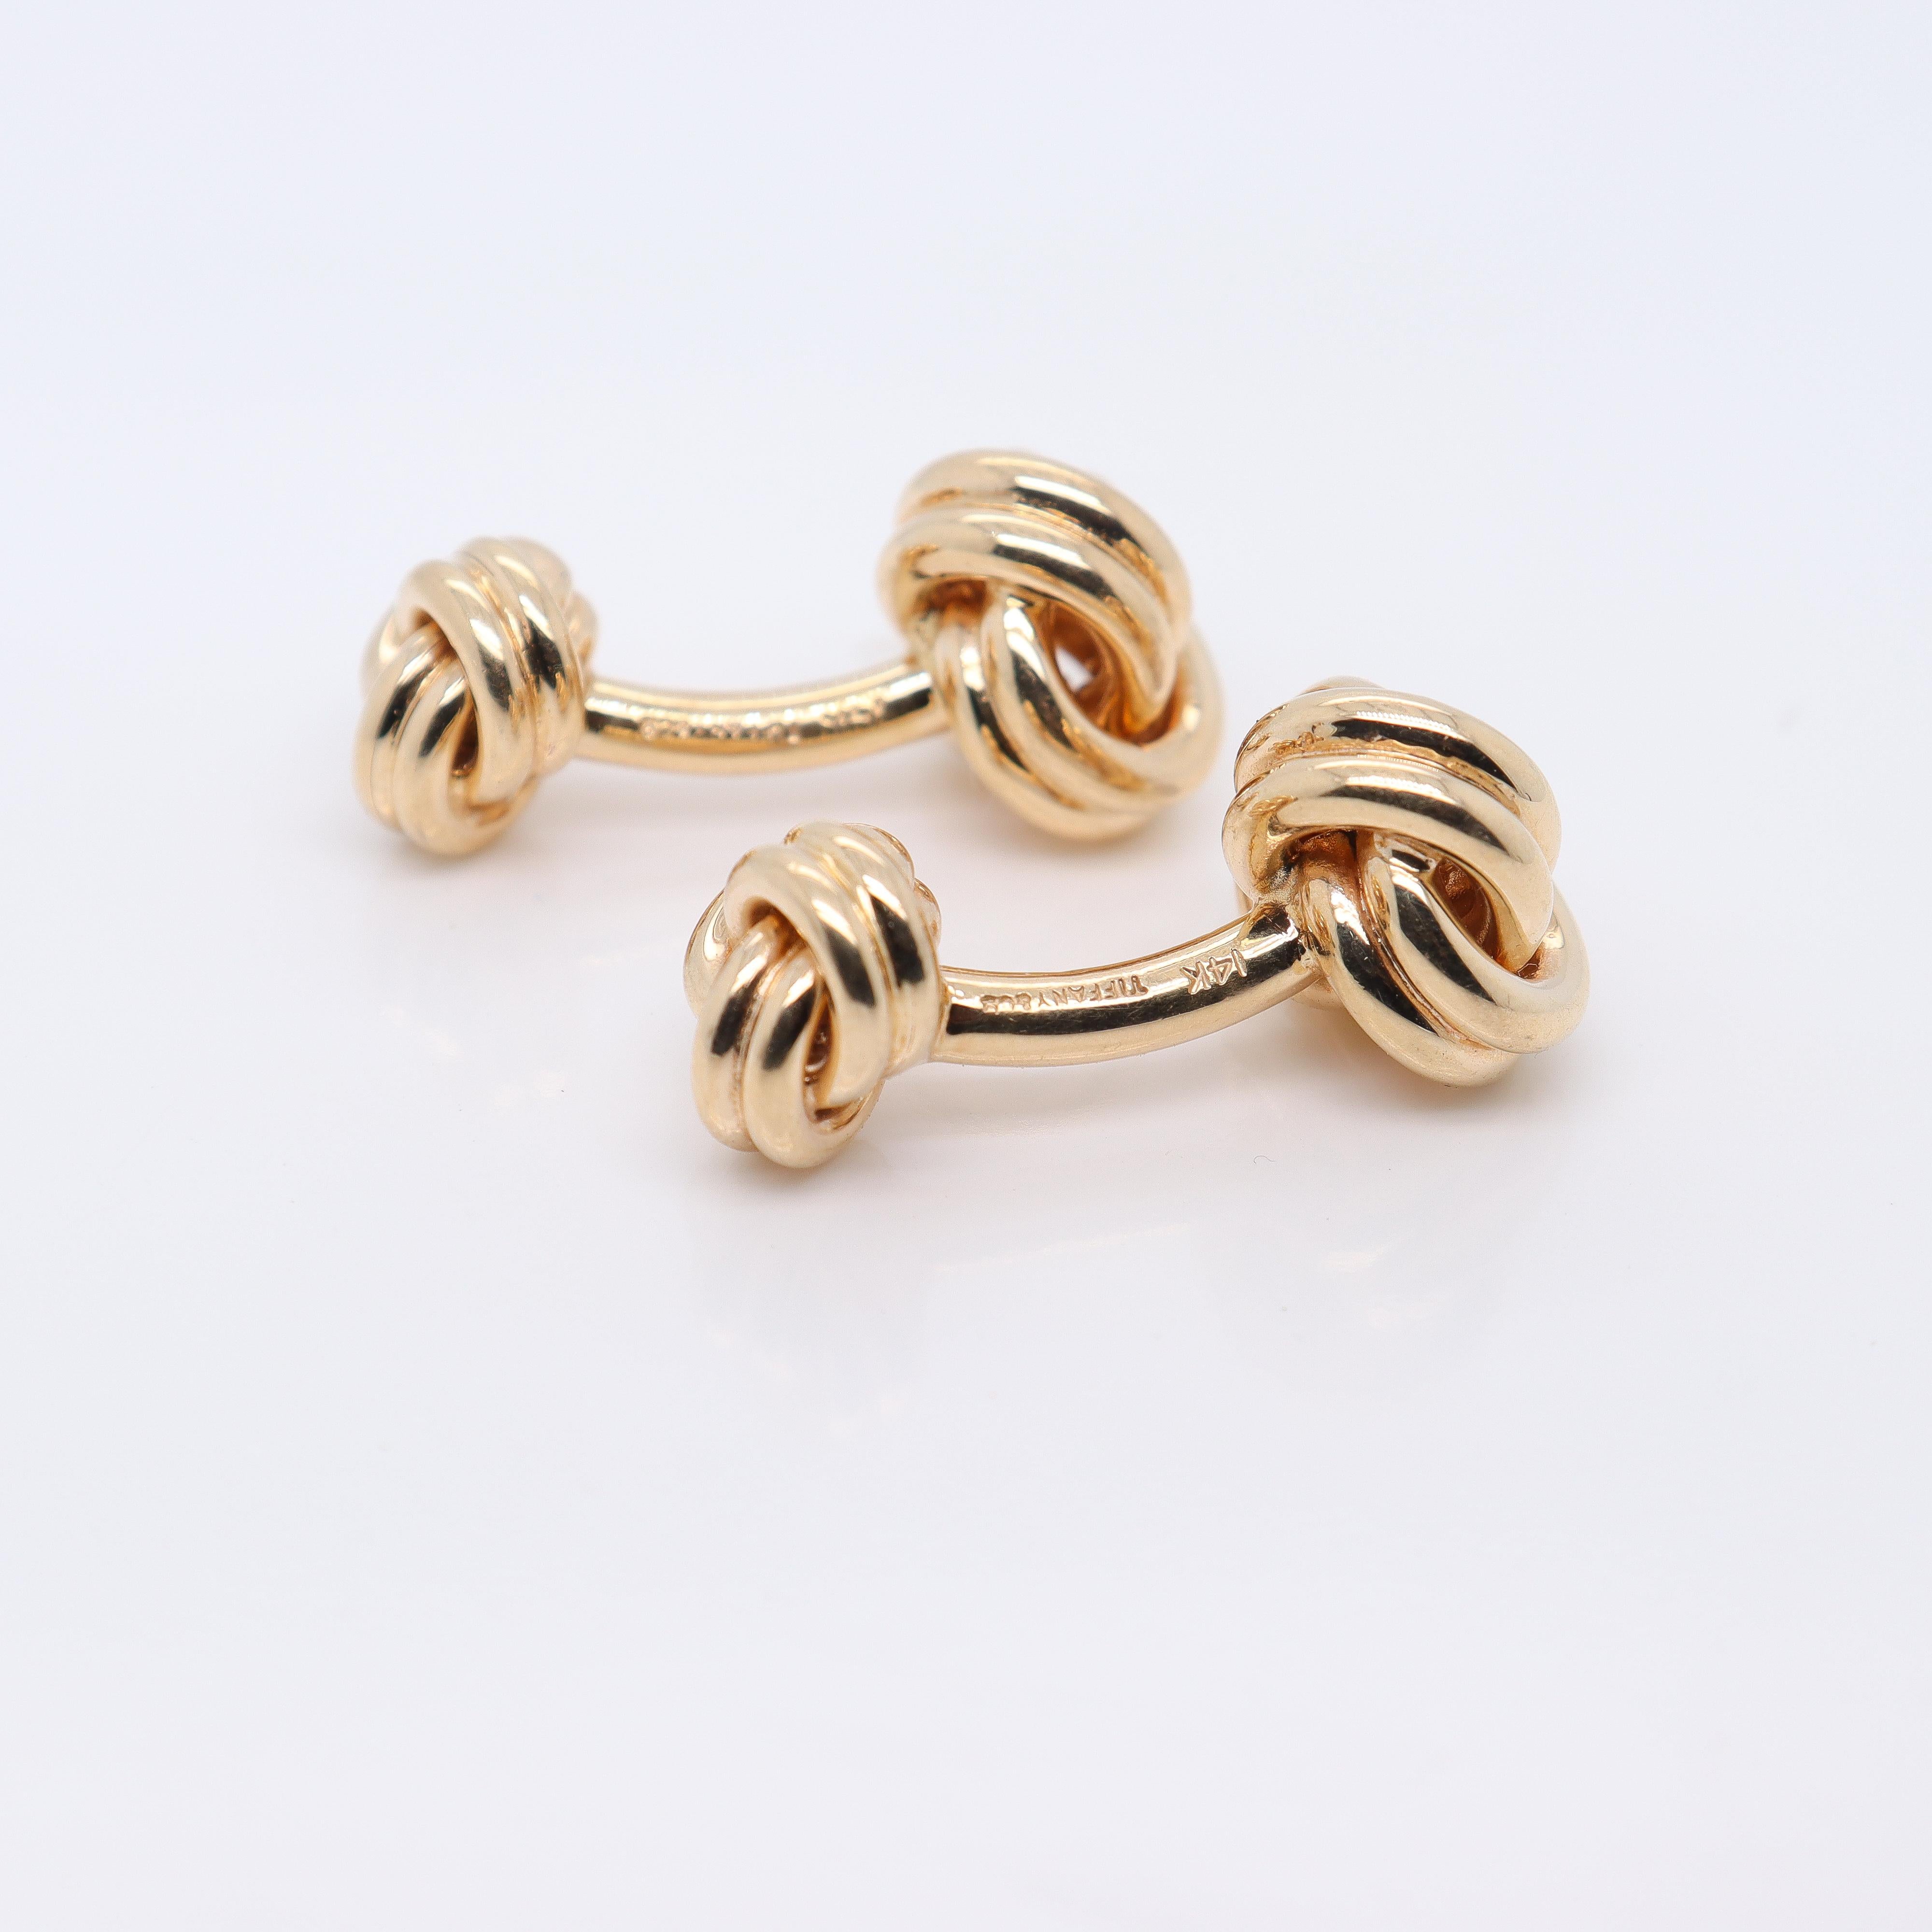 A fine pair of vintage Tiffany & Co gold love knot cufflinks.

In 14K gold. 

By Tiffany and Co.

Marked Tiffany & Co / 14K.

Together with a Tiffany leather pouch.

Simply a wonderful pair of cufflinks!

Date:
Late 20th Century

Overall